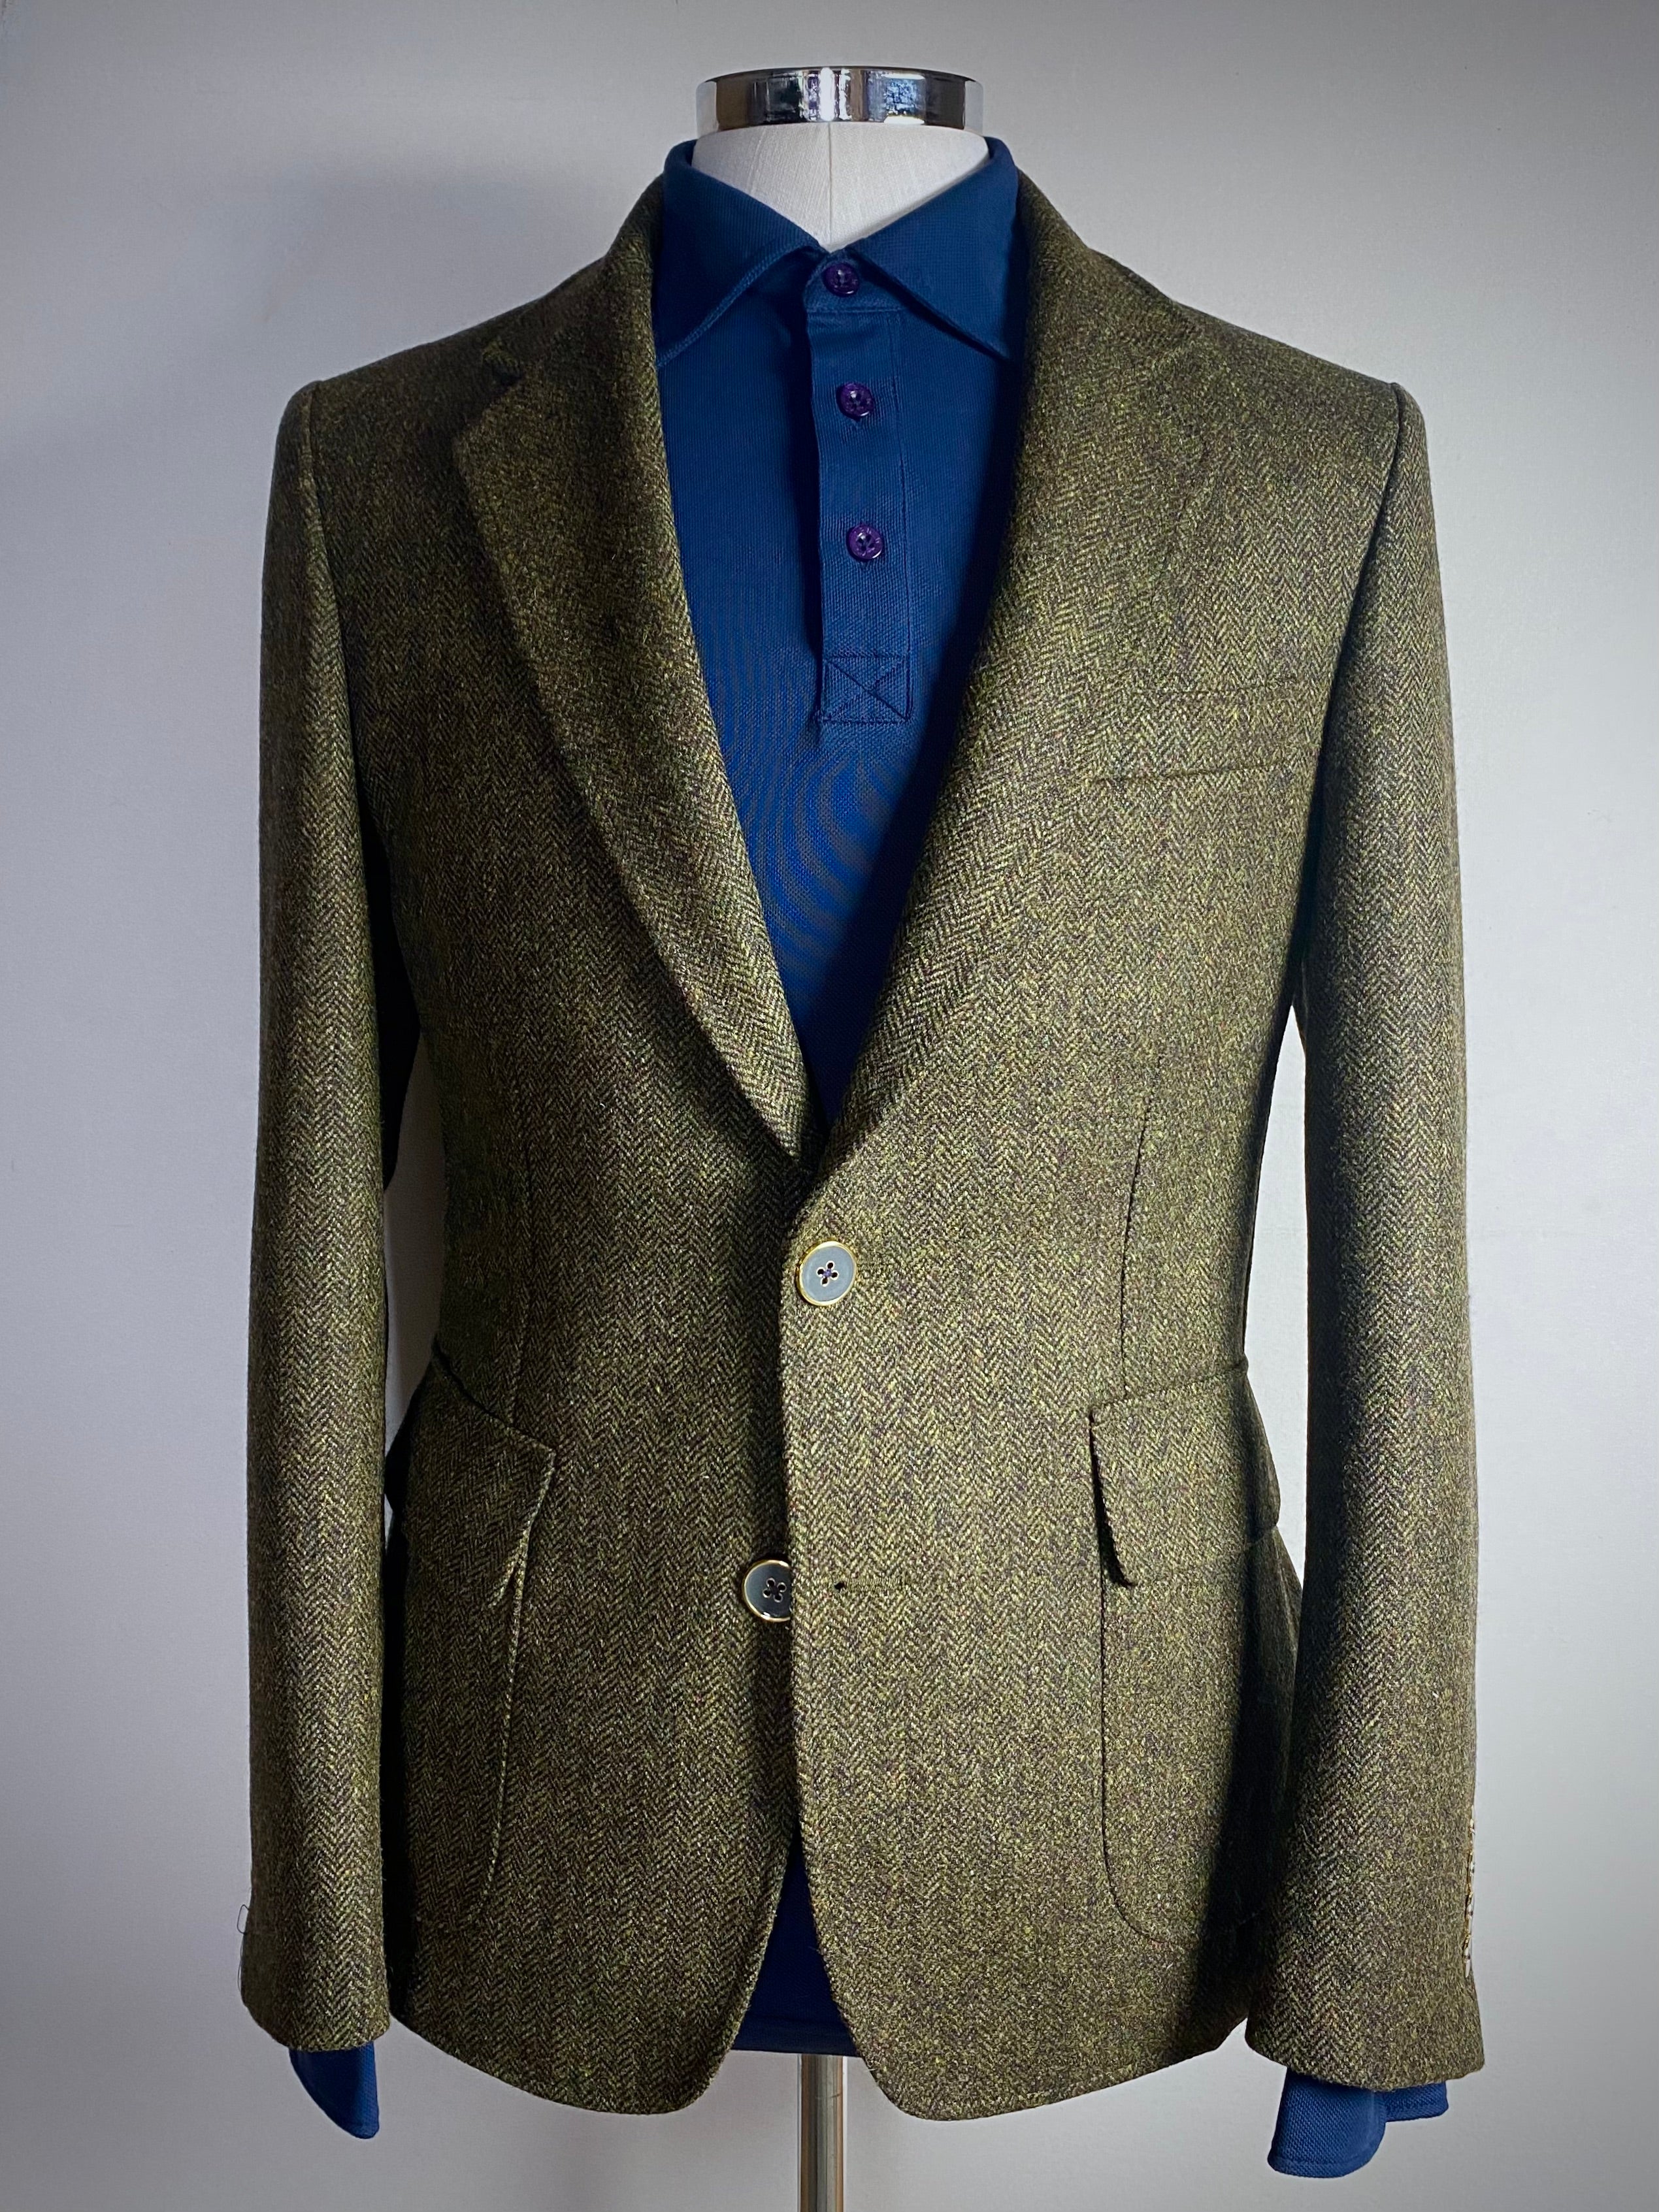 TWEED Unconstructed Blazer. – Lord Willy's. Established.